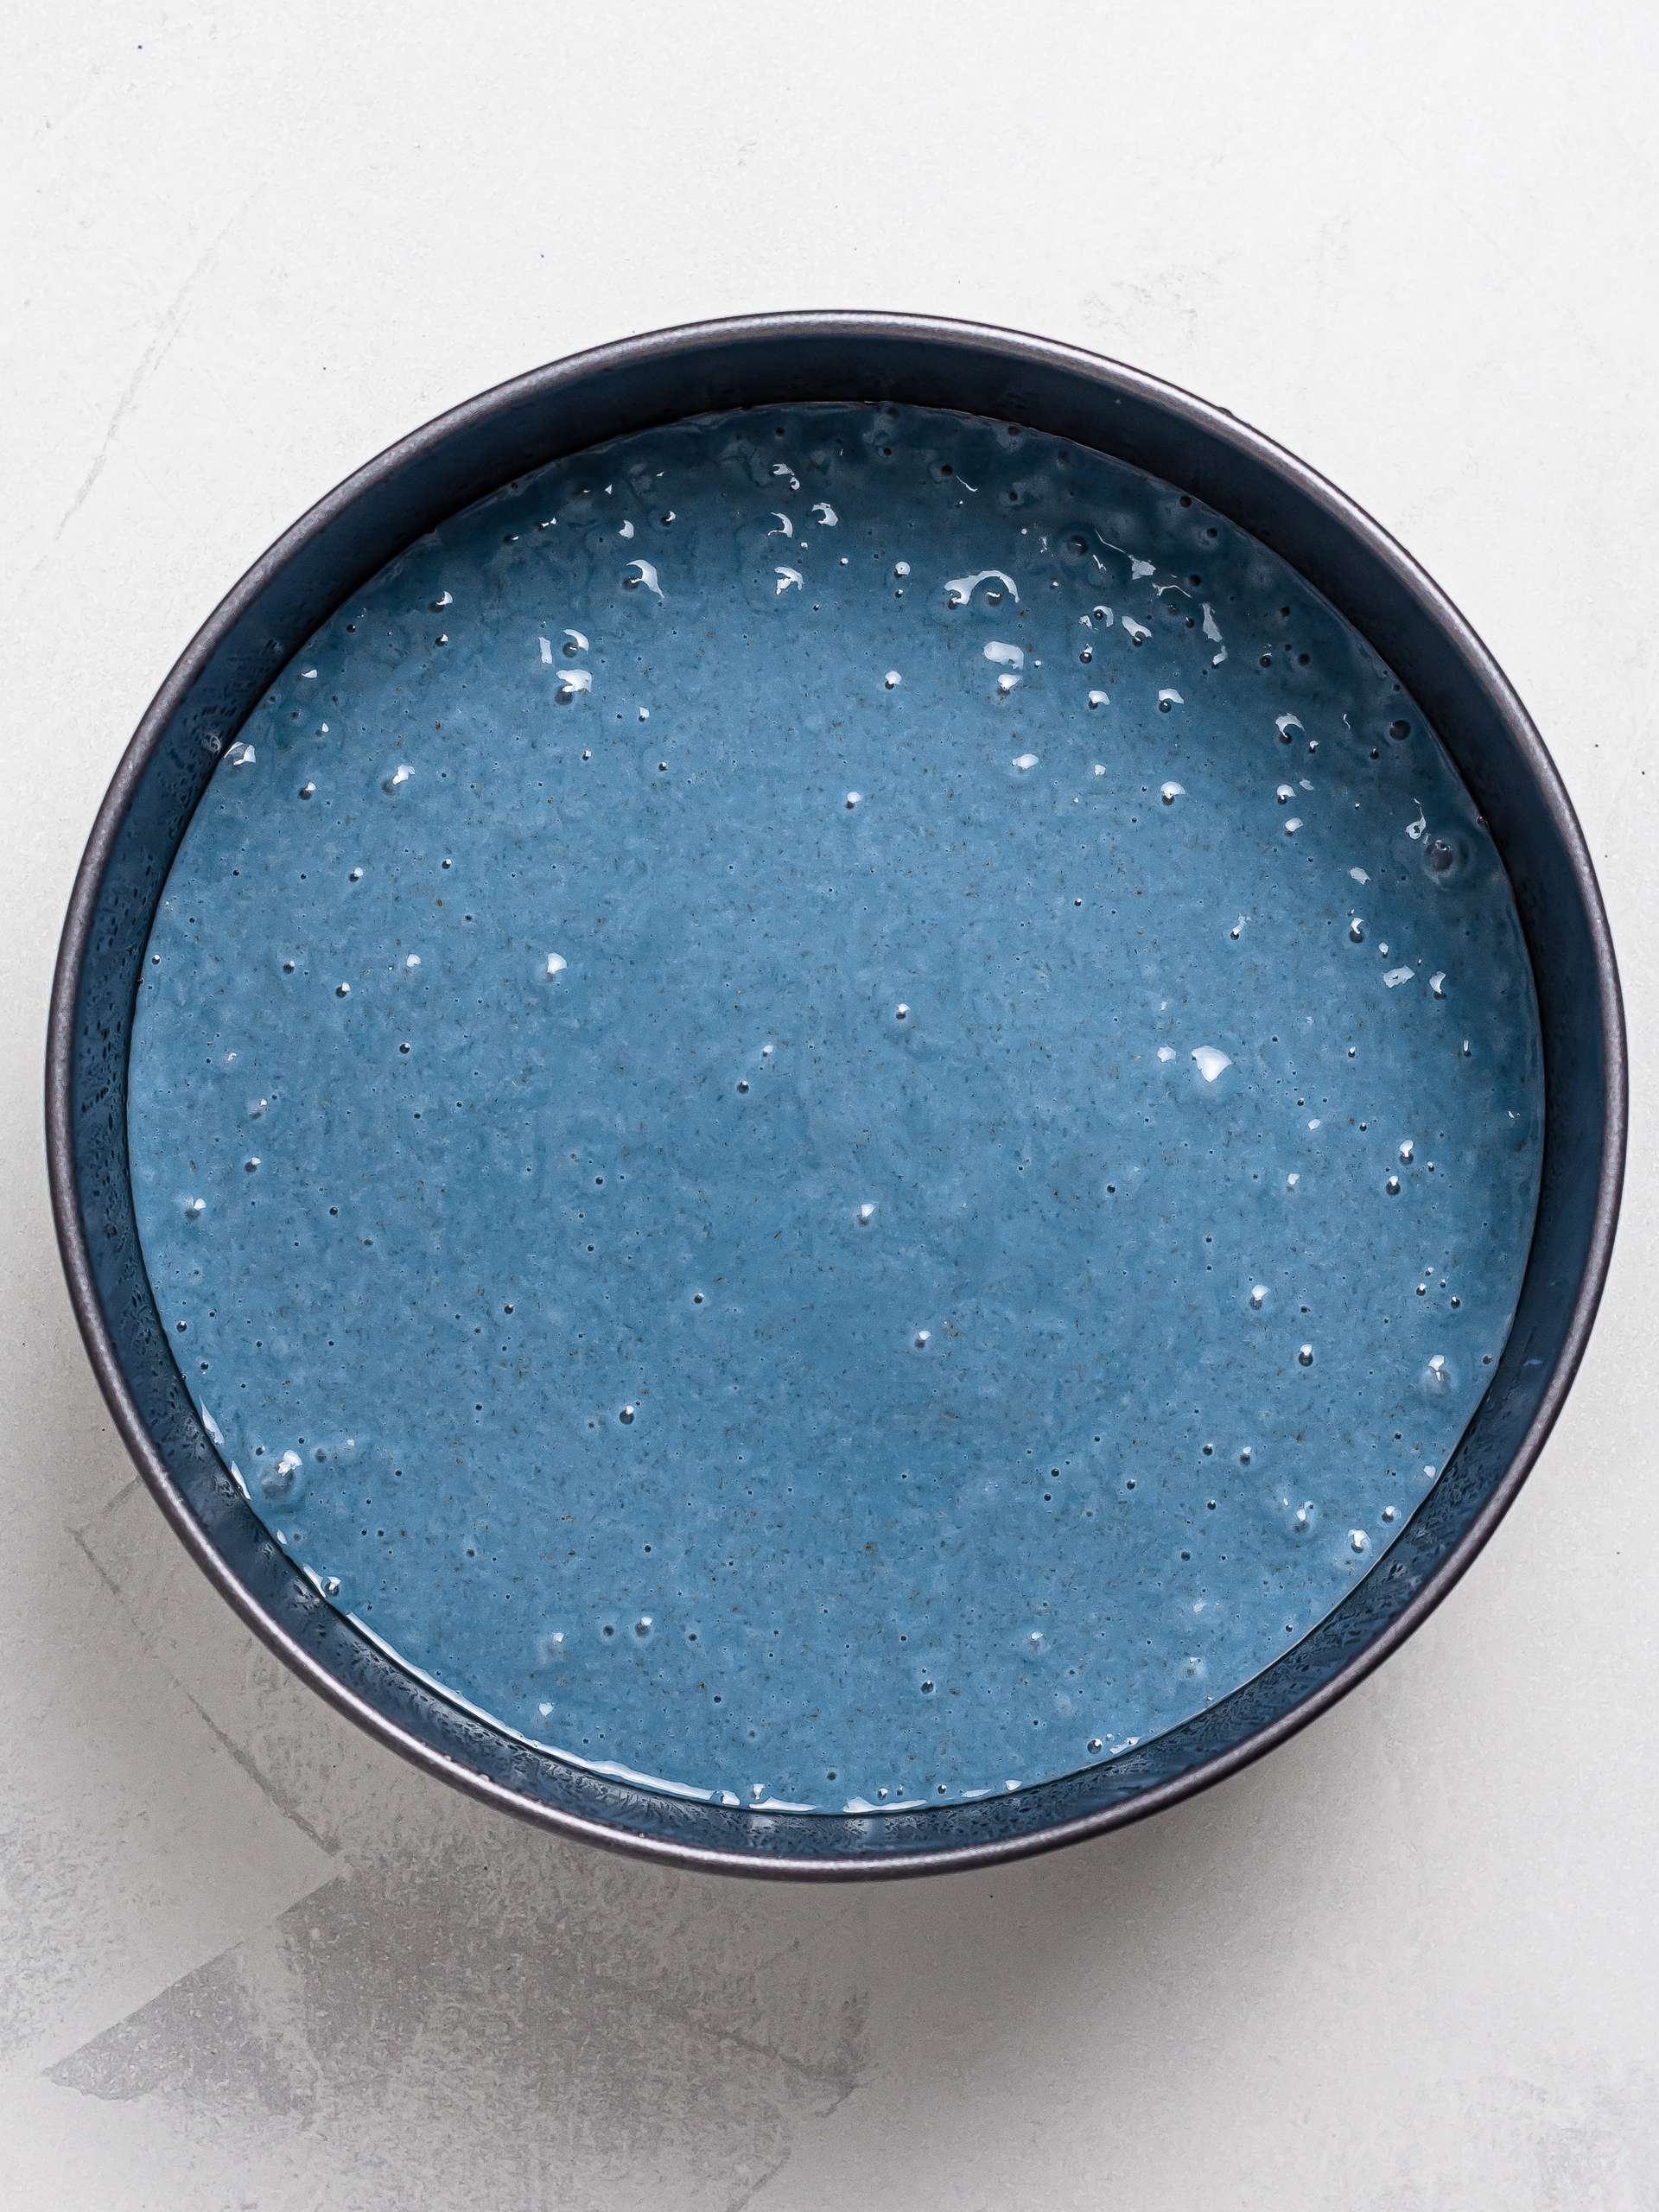 butterfly pea cake batter in a round cake tin